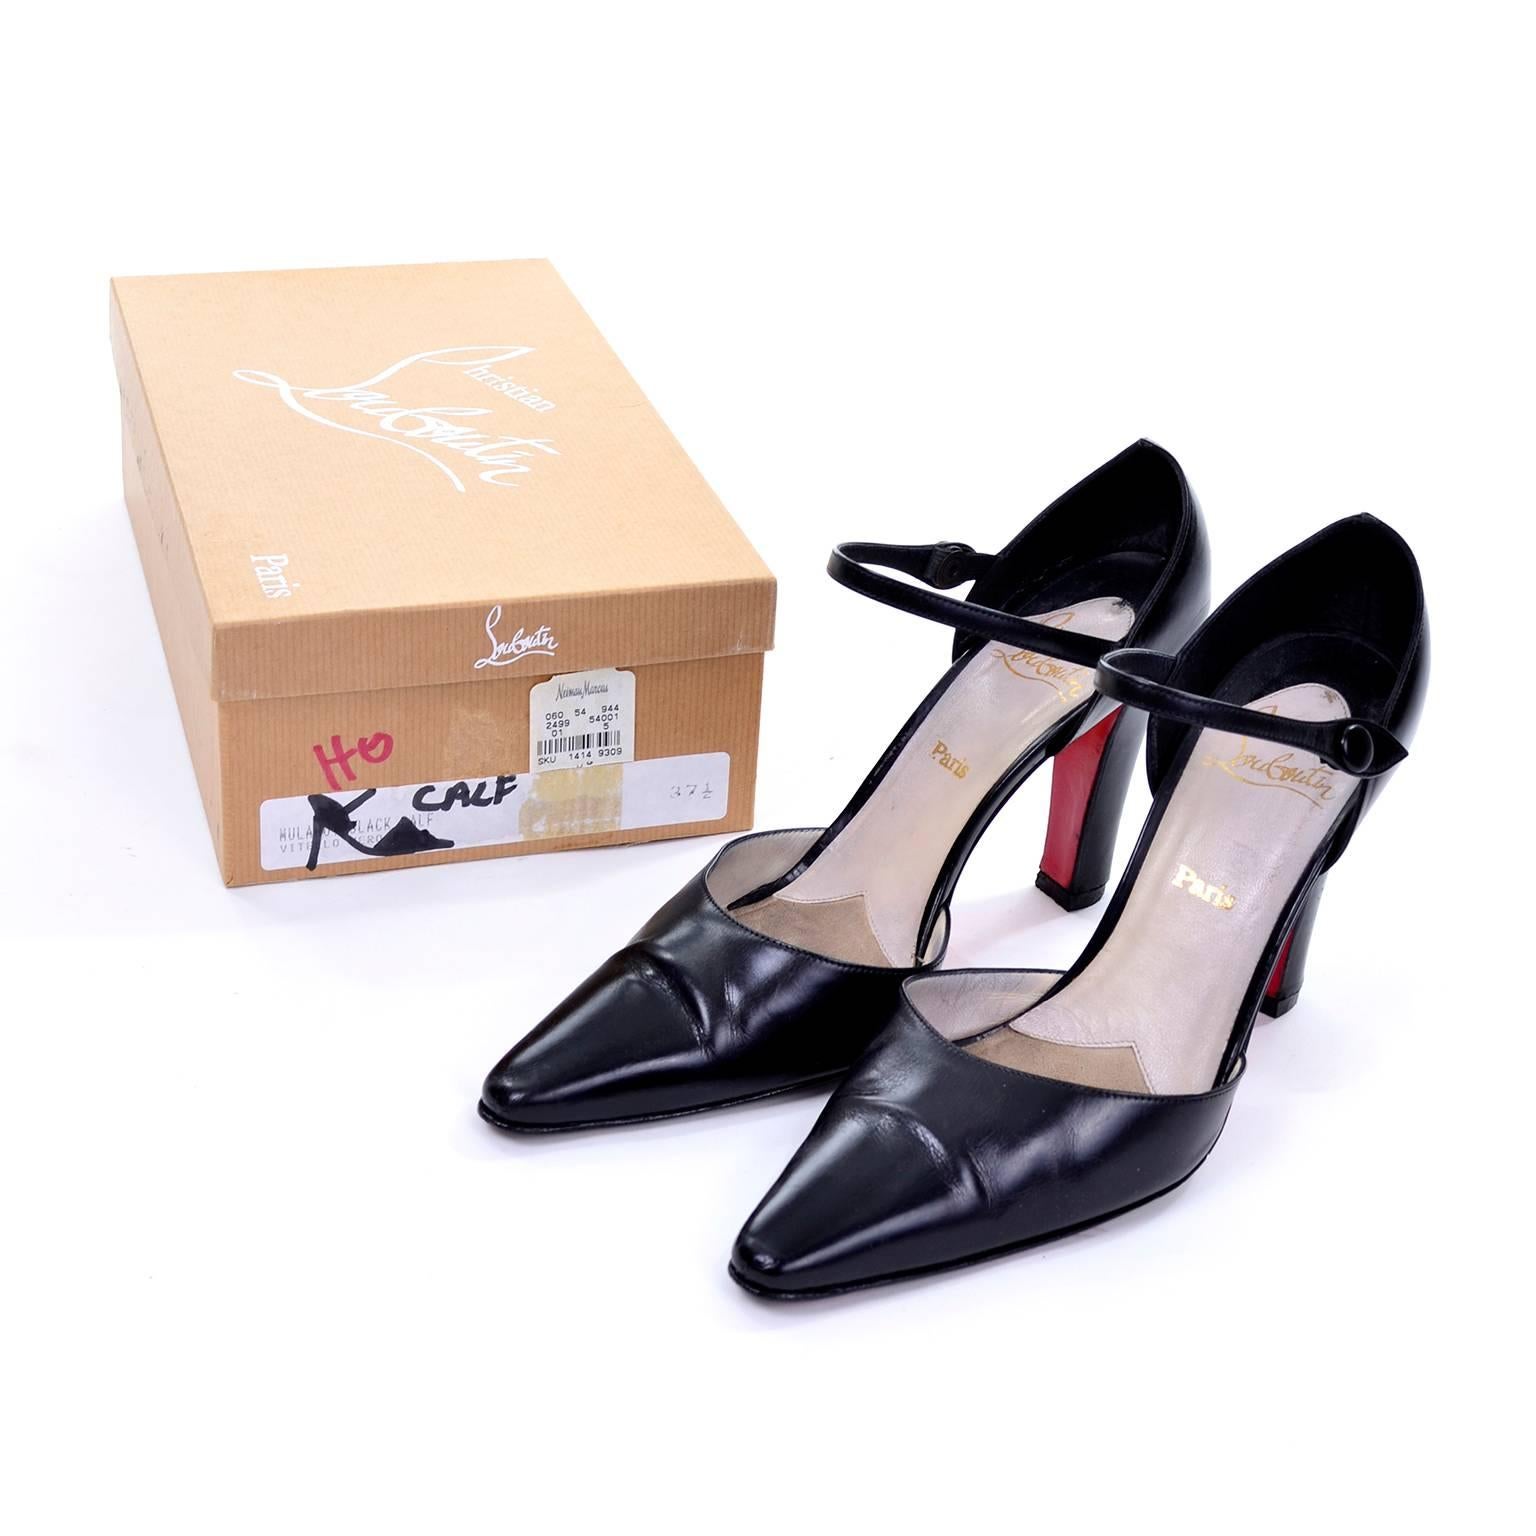 We love these Christian Louboutin vintage Mulano black calf leather pumps with the iconic red sole! They have chunky tall heels and a fun pointed top on the back of the heel. These heels have an ankle strap that snaps on one side and a slightly